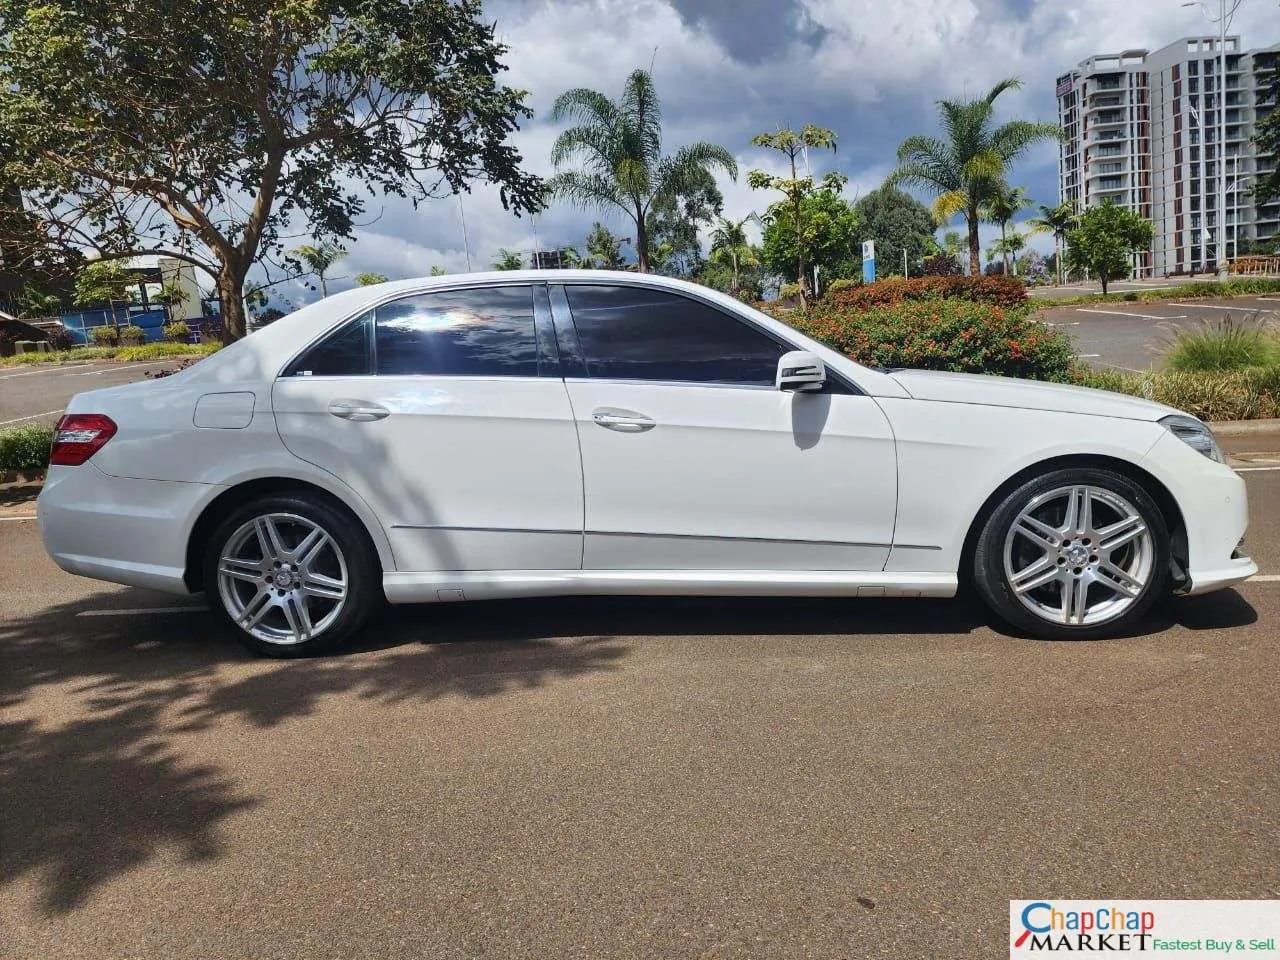 Mercedes Benz E250 kenya Cheapest You Pay 30% DEPOSIT Trade in OK e250 for sale in kenya hire purchase Exclusive